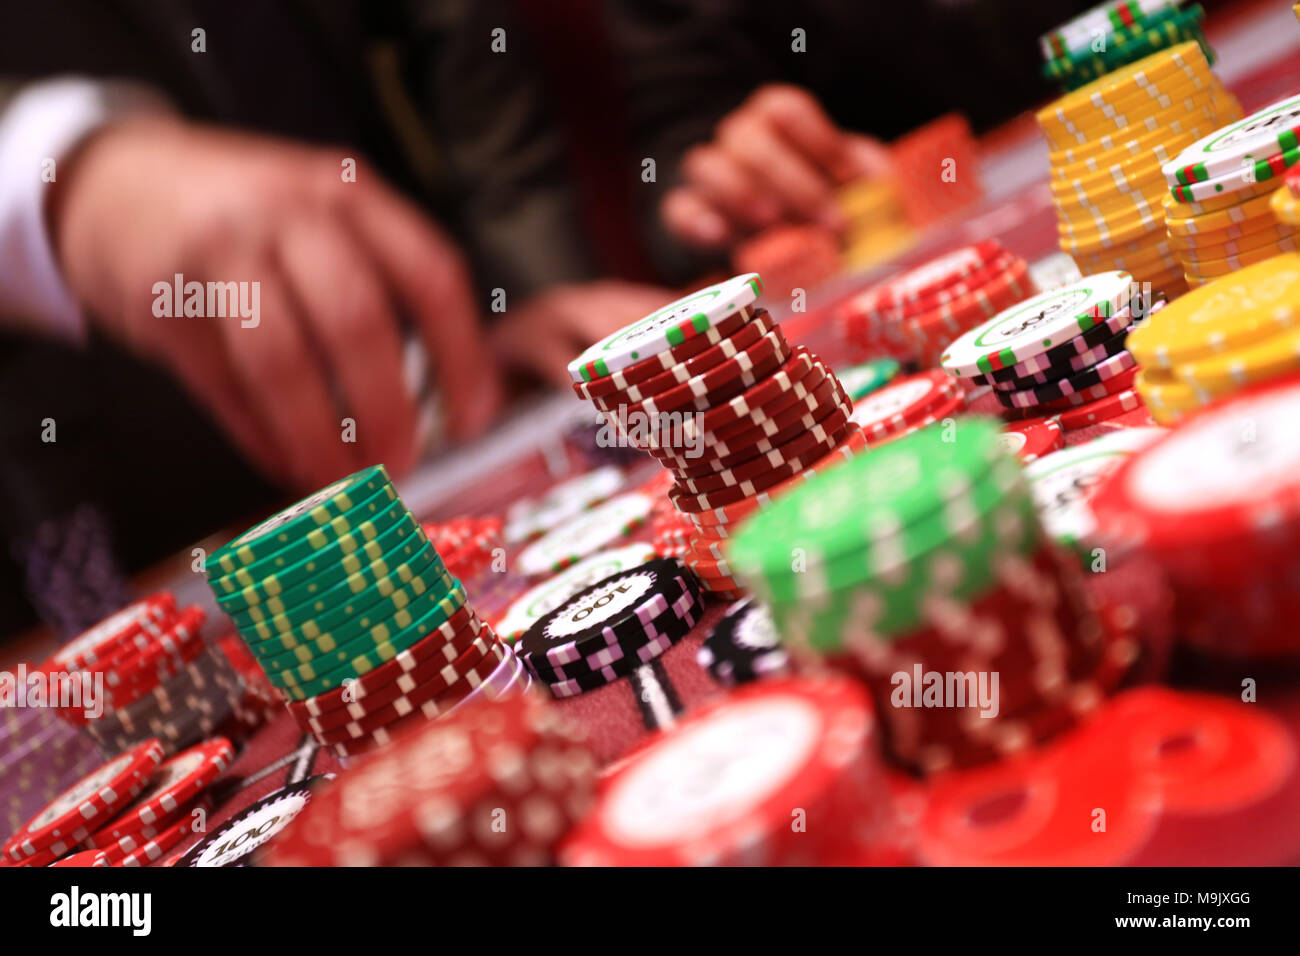 Player placing chips on a gambling table in casino Stock Photo